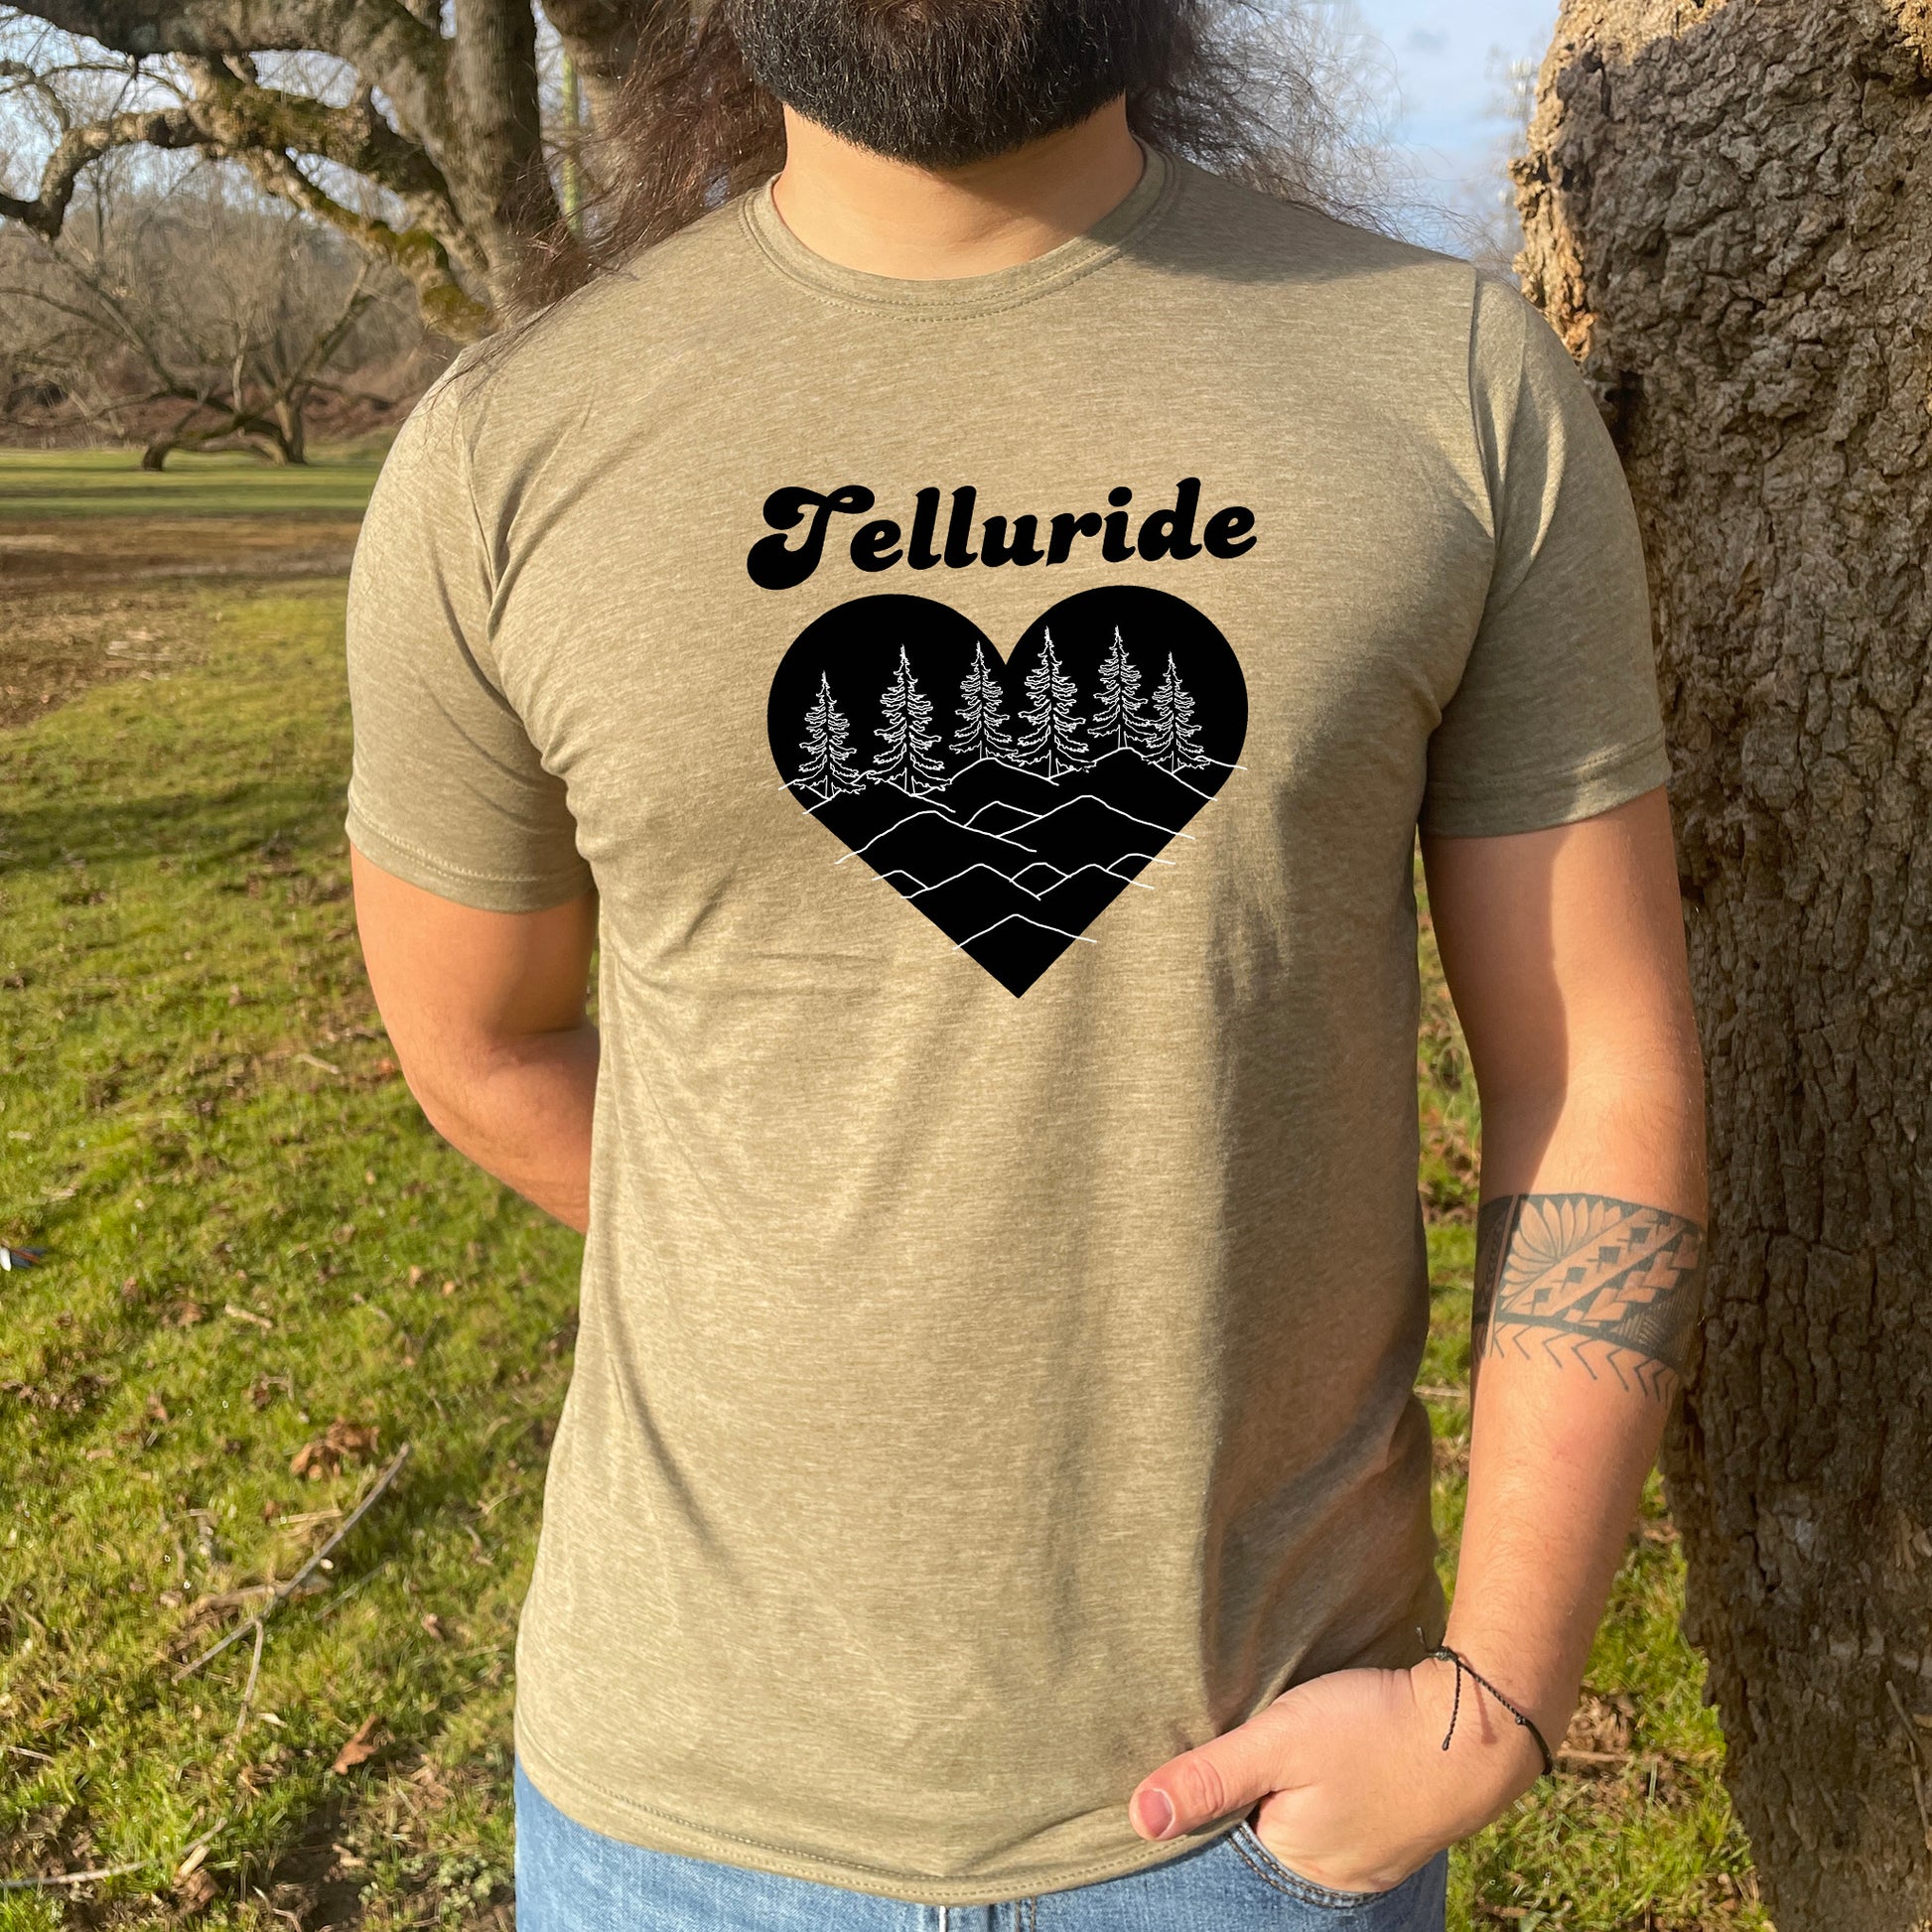 a man with a beard wearing a t - shirt that says telluride